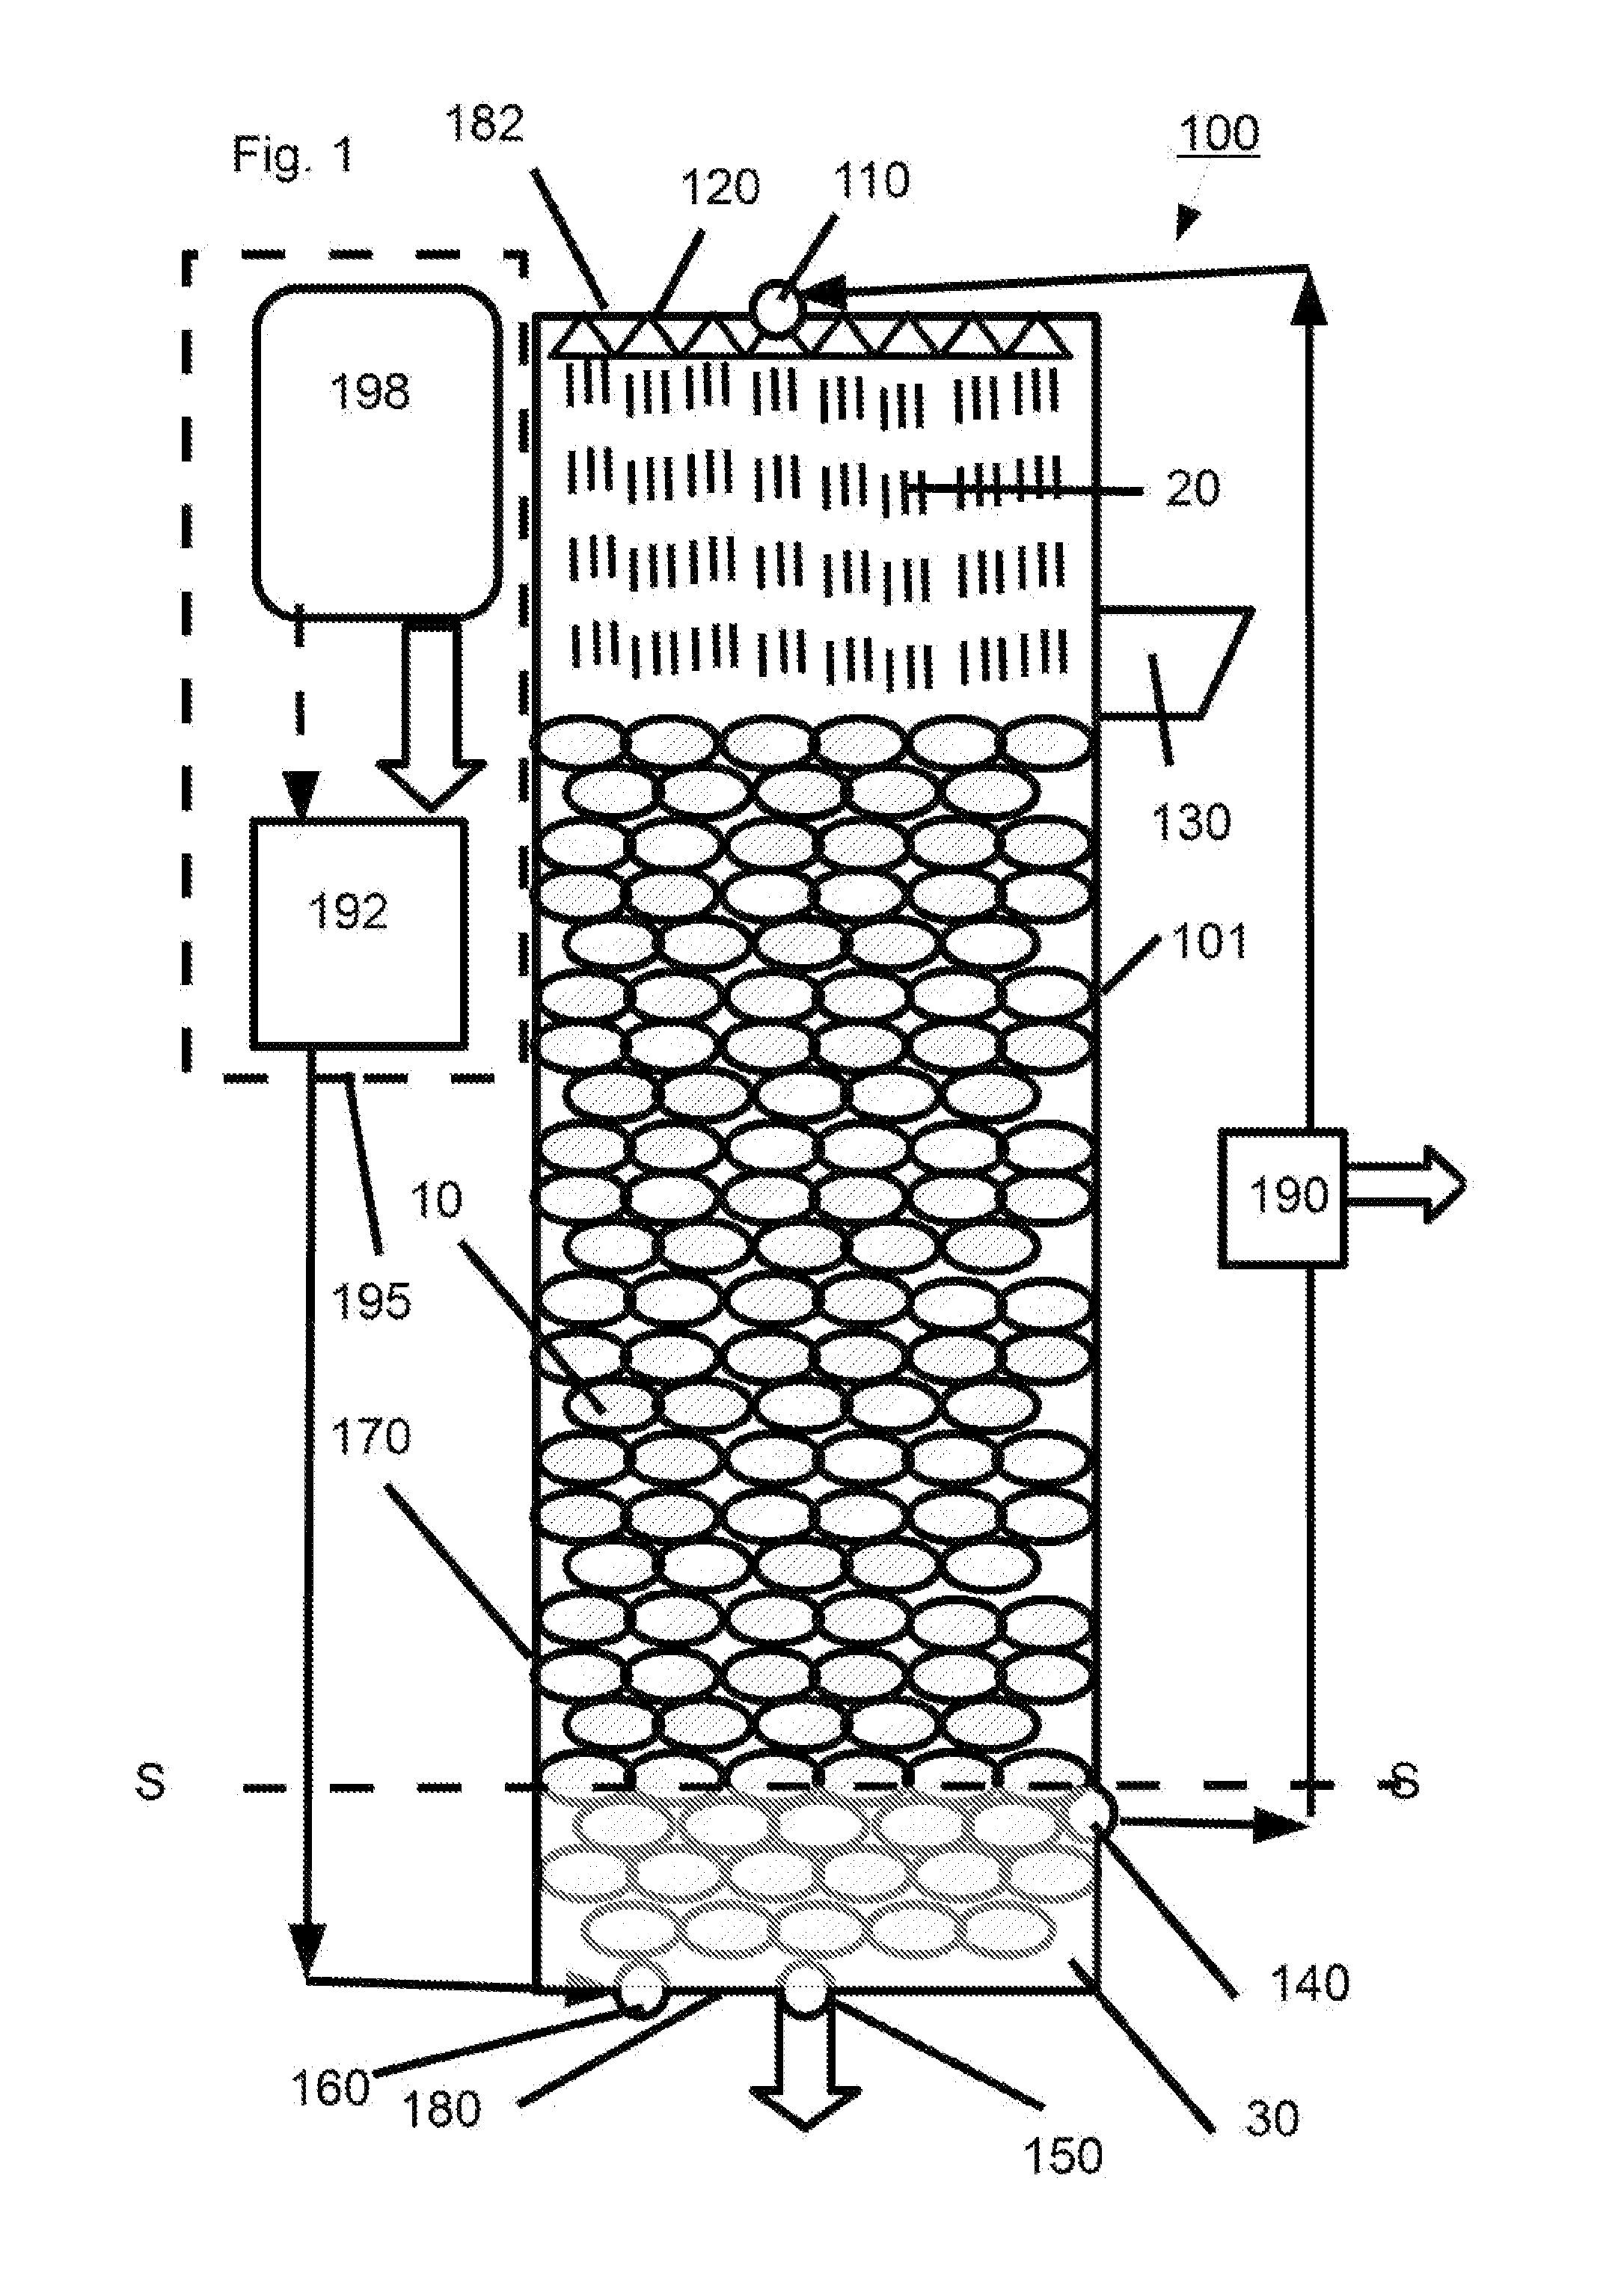 Hydrolysis systems and methods